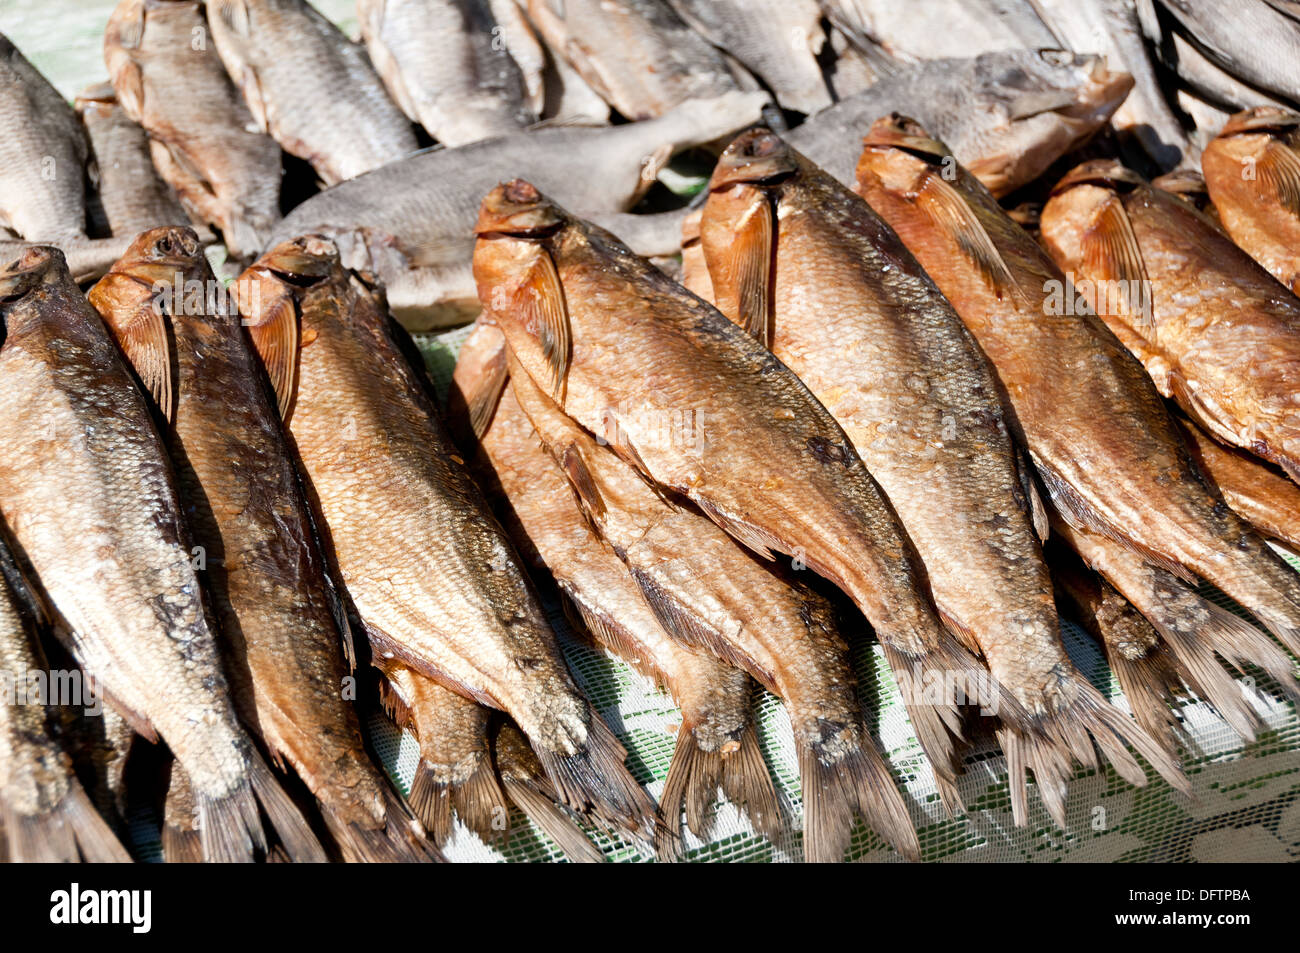 Dried tasty fish lies in the market Stock Photo